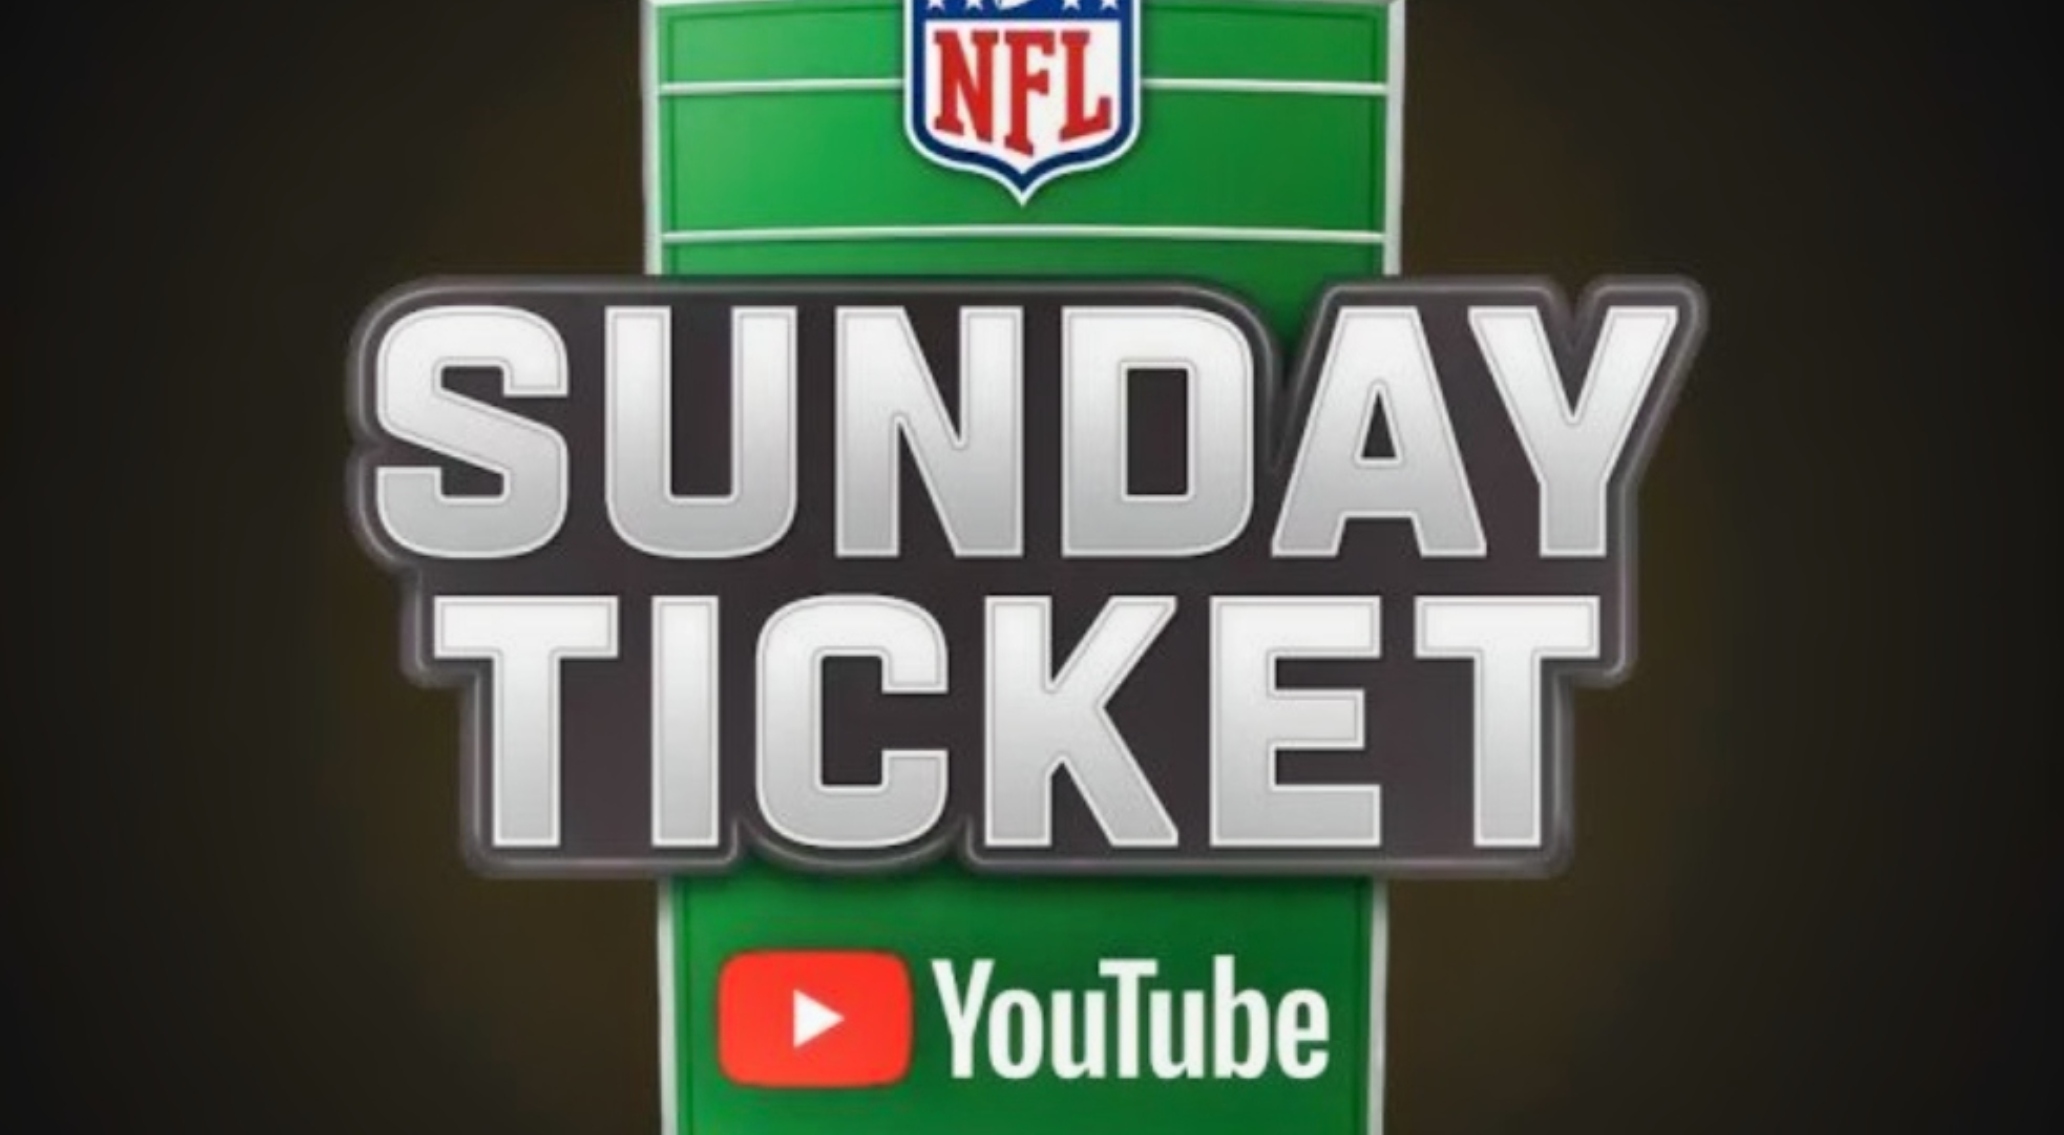 YouTube Announces Multiview Option For NFL Sunday Ticket